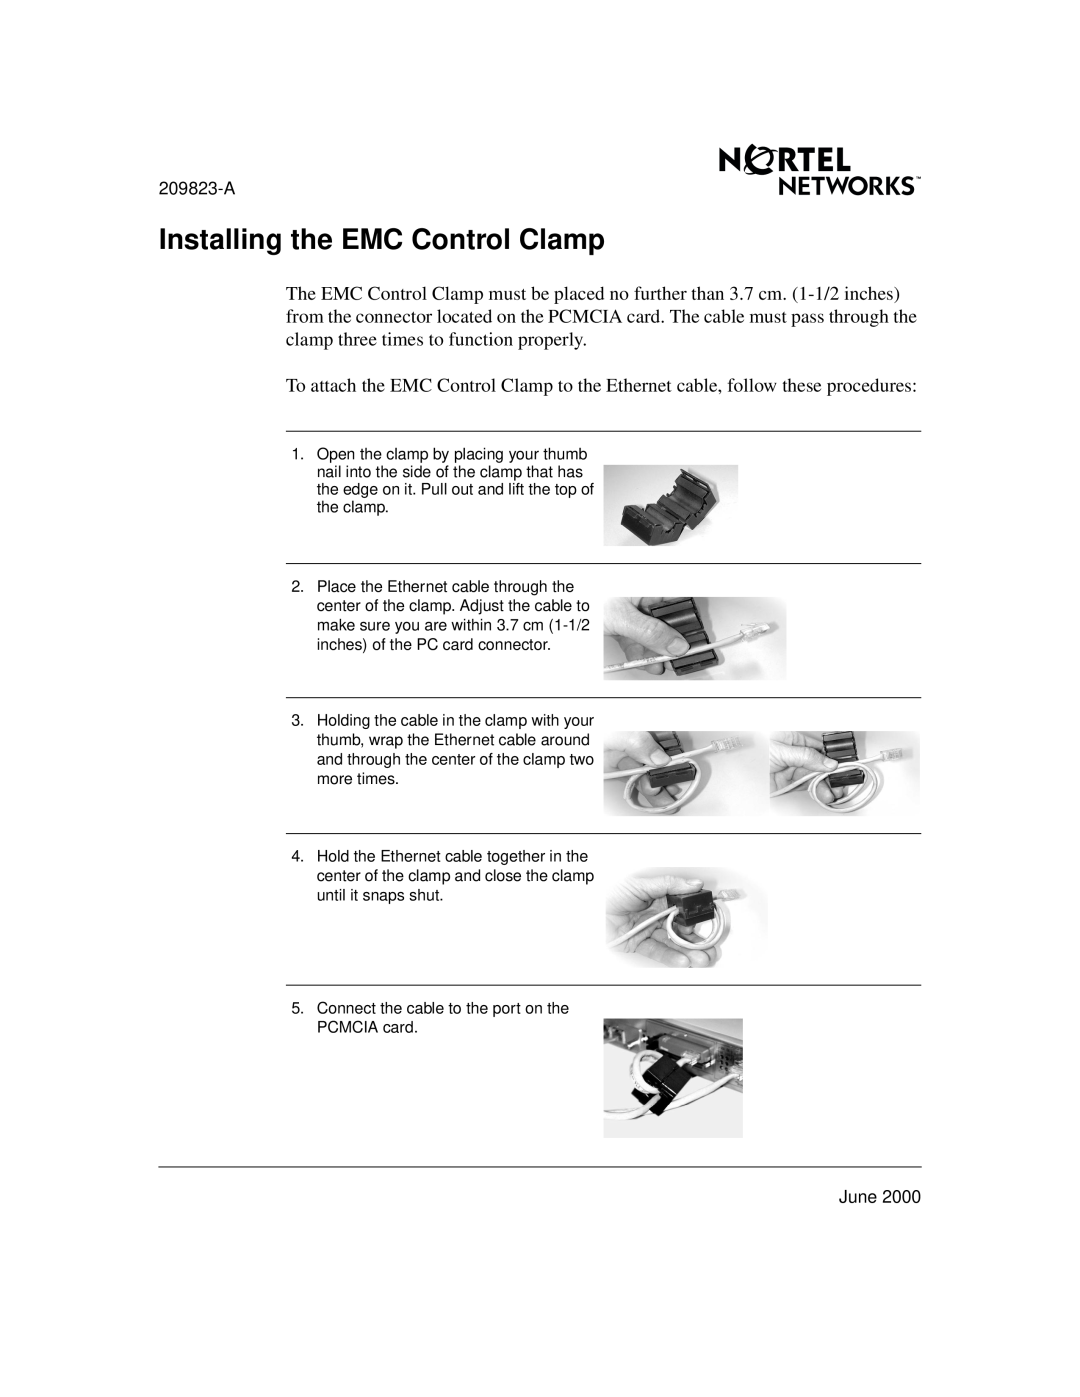 Nortel Networks manual Installing the EMC Control Clamp, 209823-A, June 